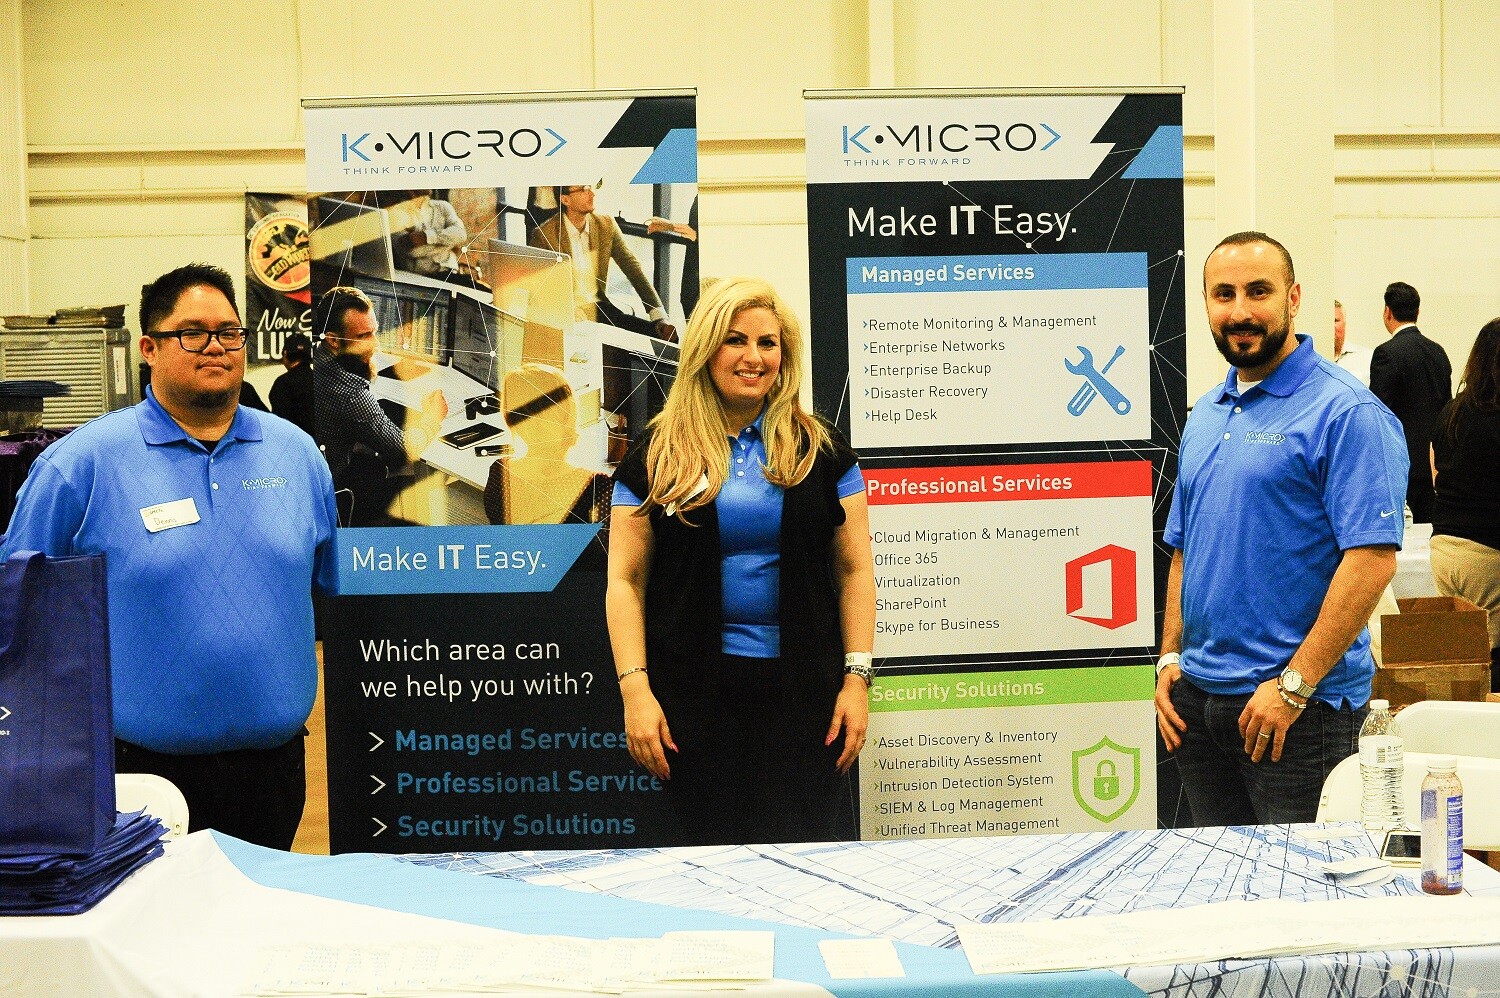 KMicro joined hundreds of other Orange County businesses to partake in OC’s Largest Mixer